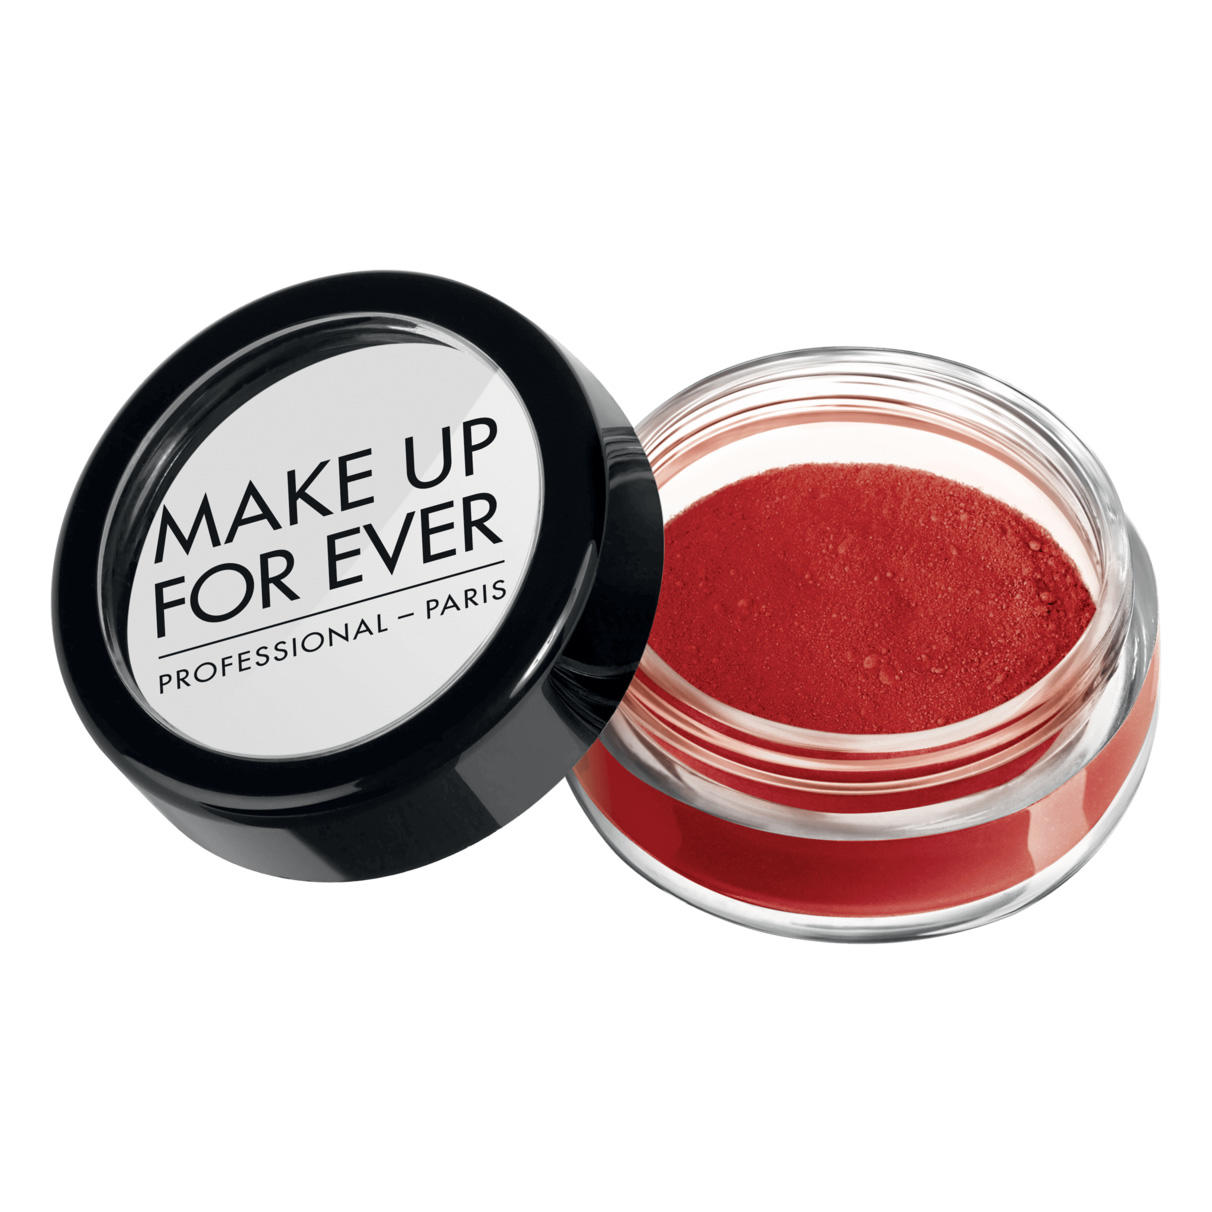 Makeup Forever Pure Pigments Intense Colored Powder Bright Red No. 6